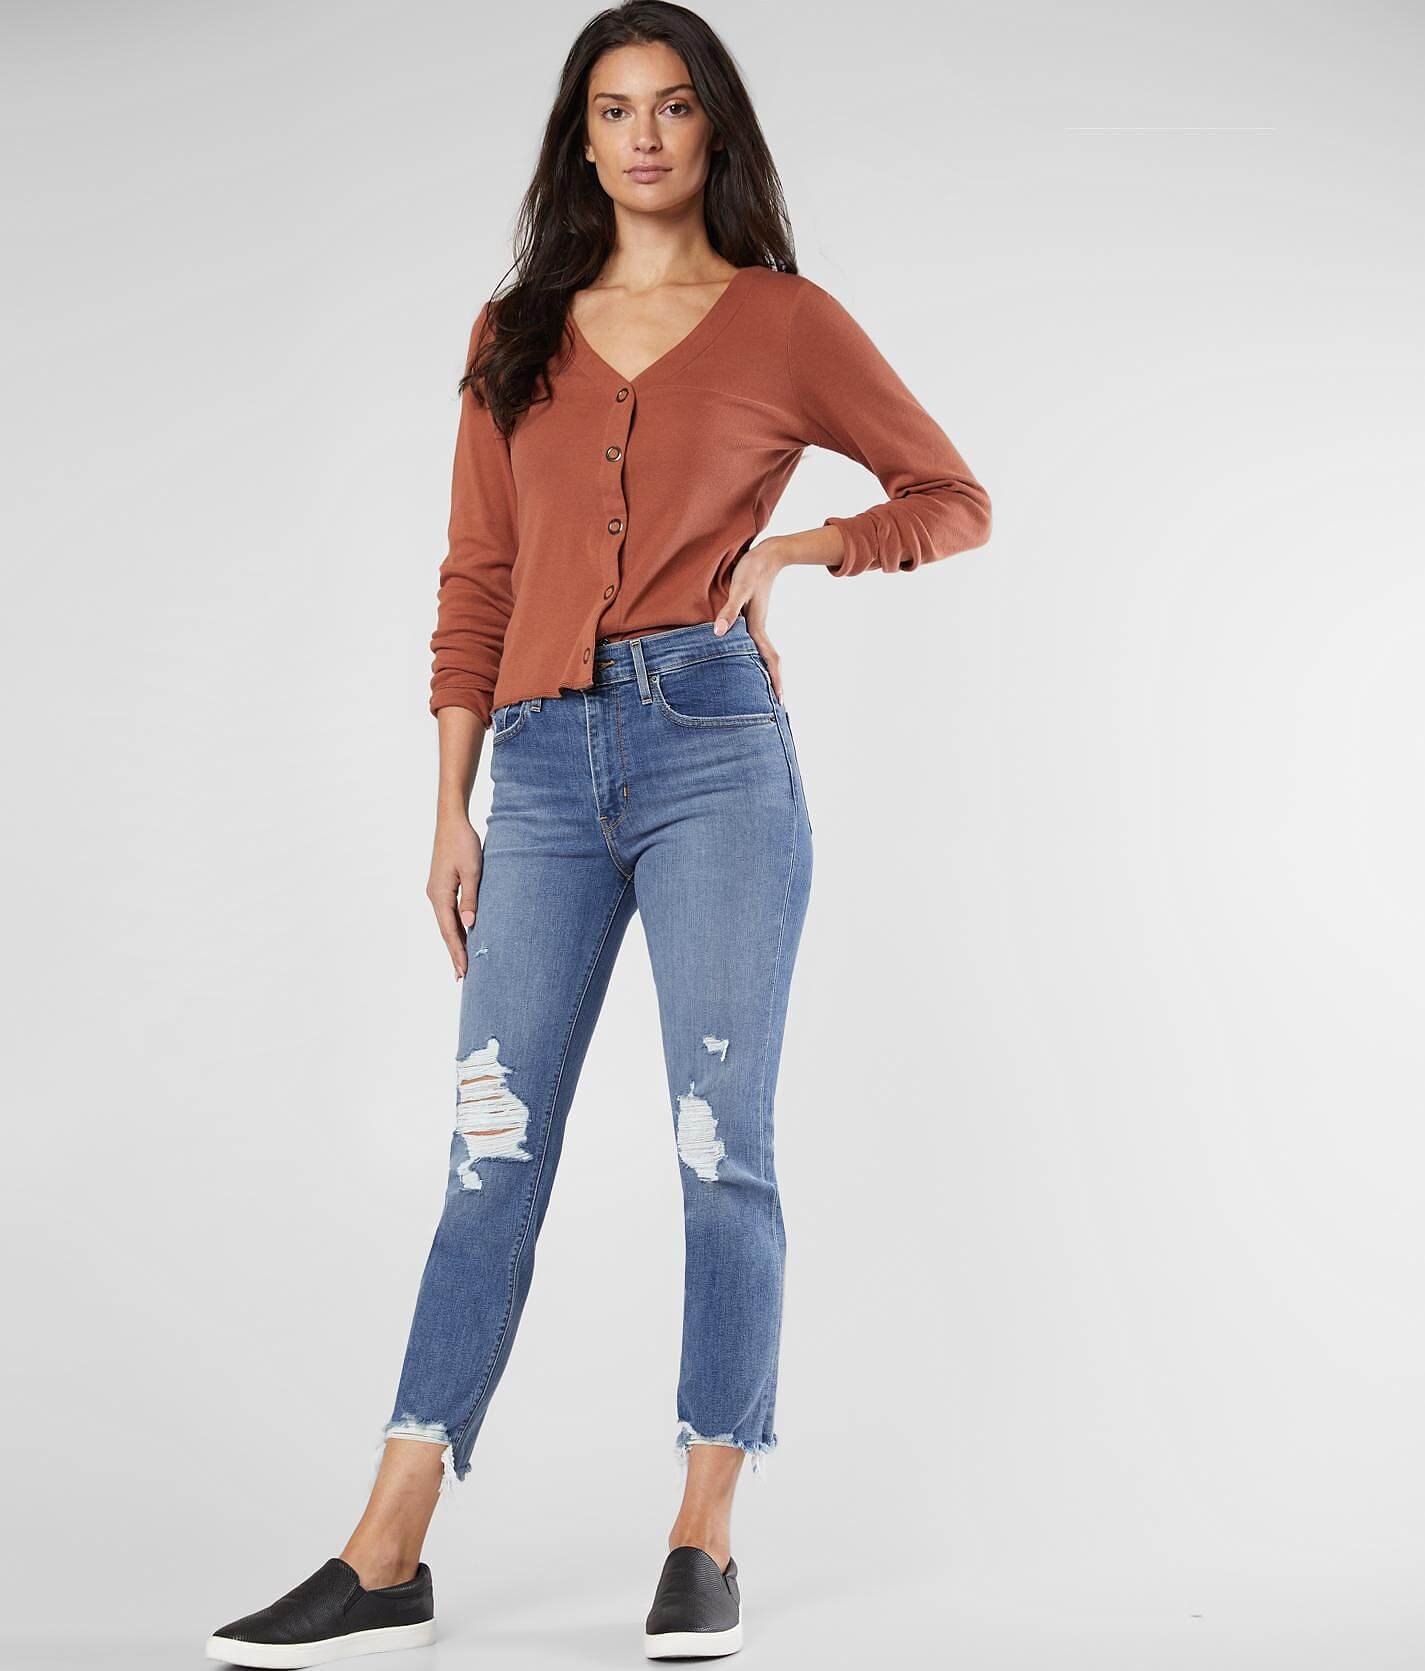 levi's cropped jeans womens